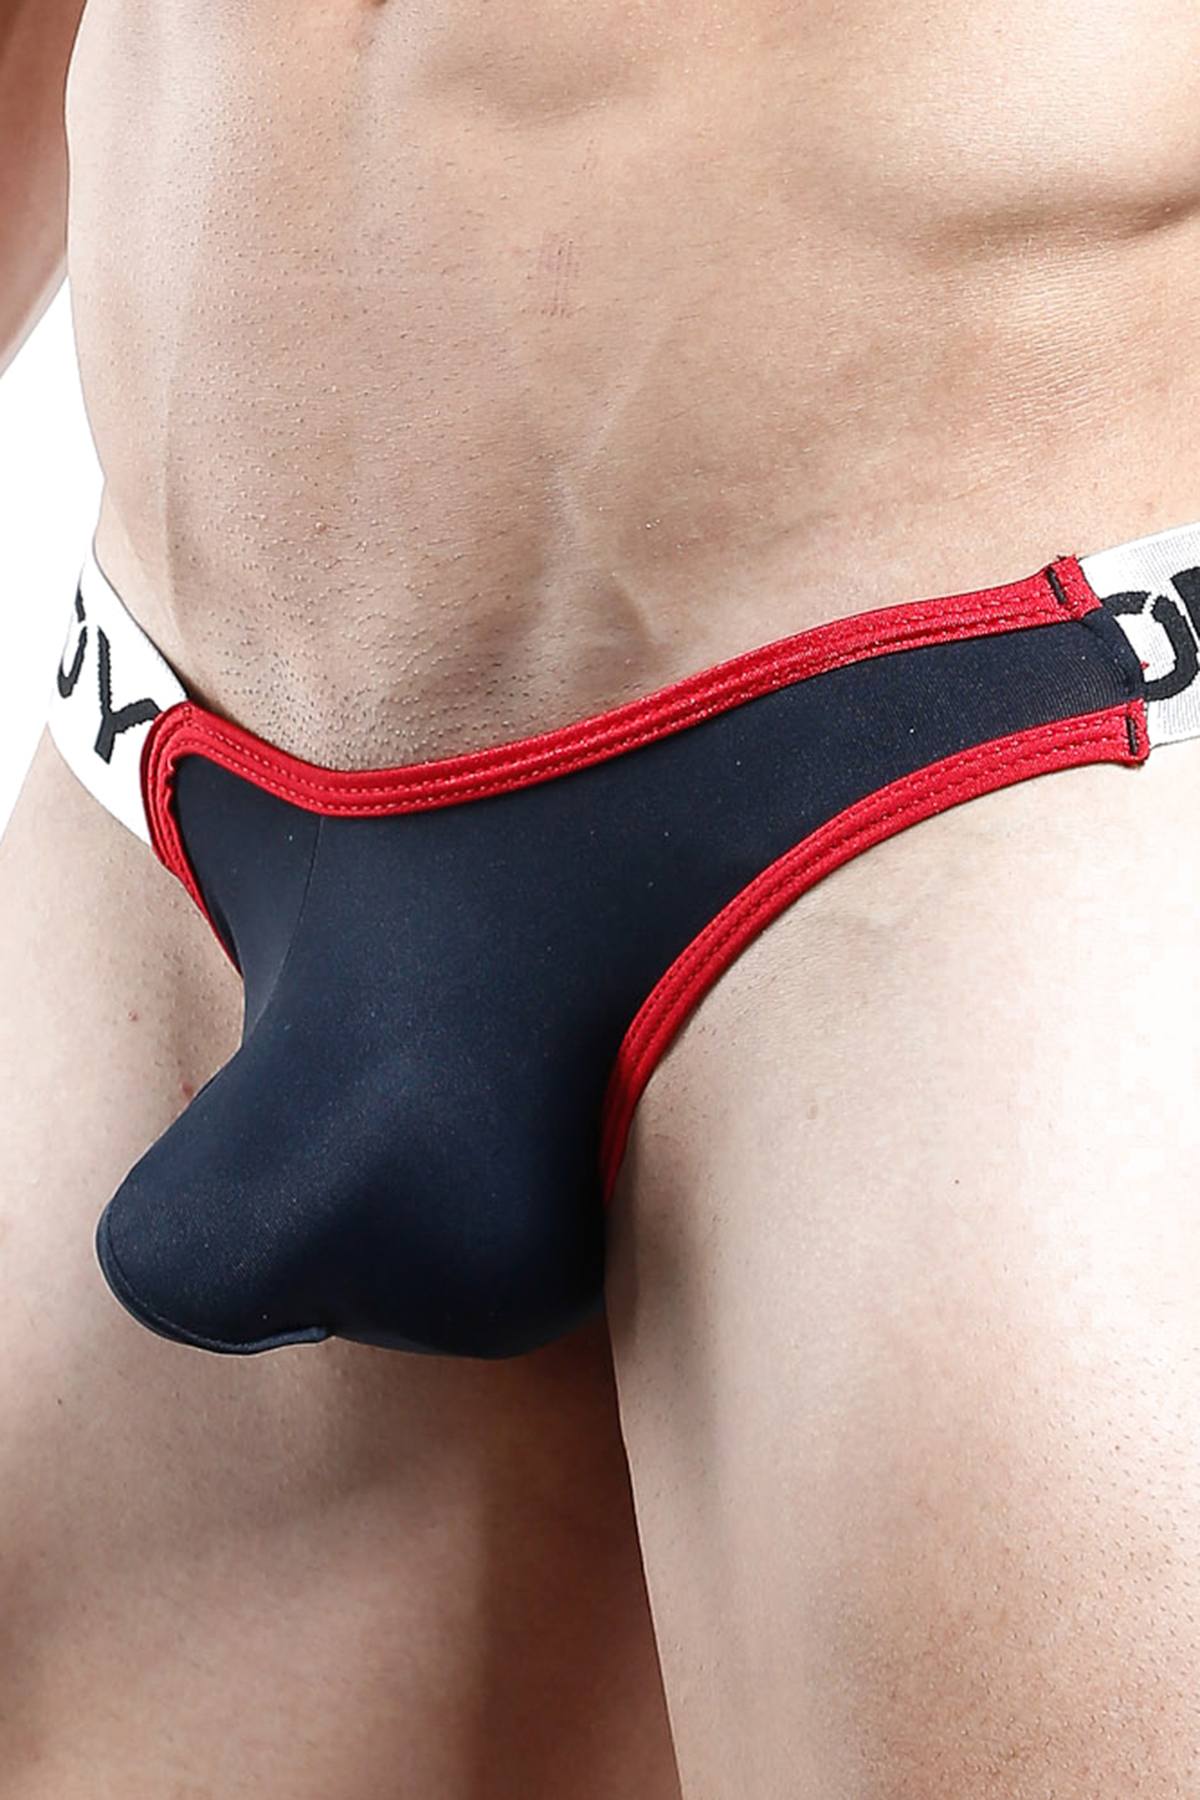 Daddy Black/Red Abstract Jock